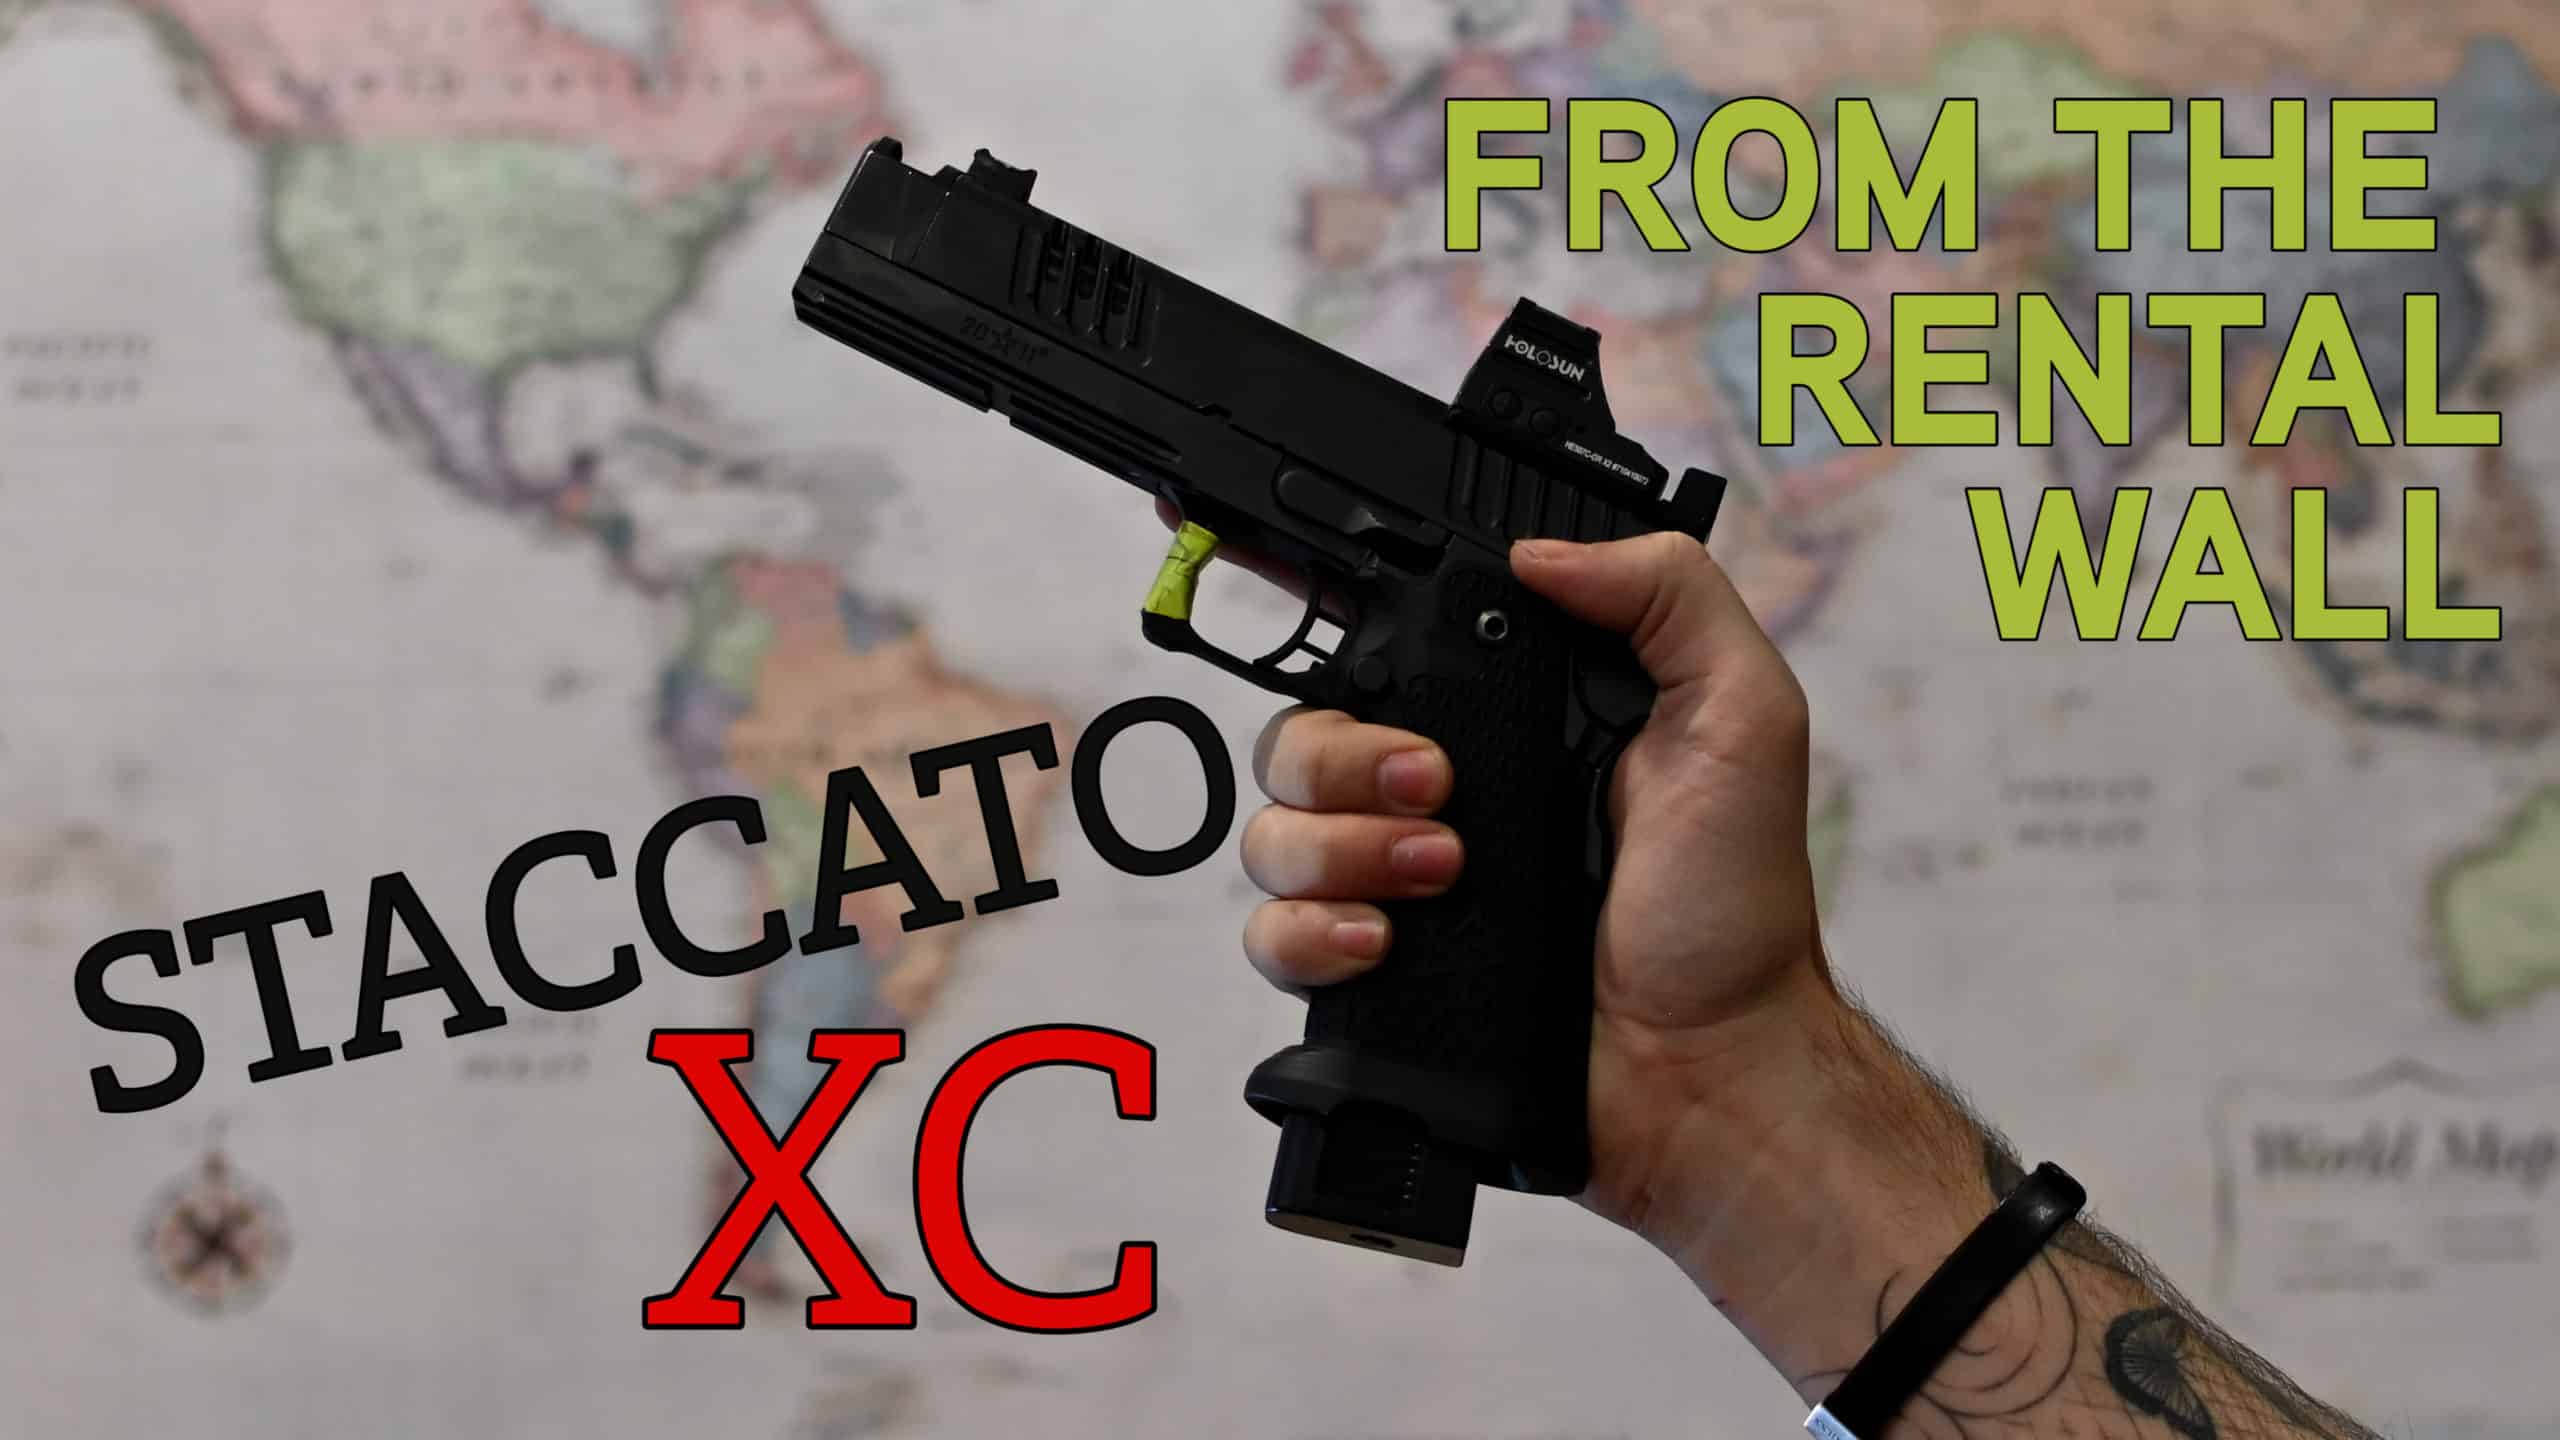 staccato xc from the rental wall video thumnbnail